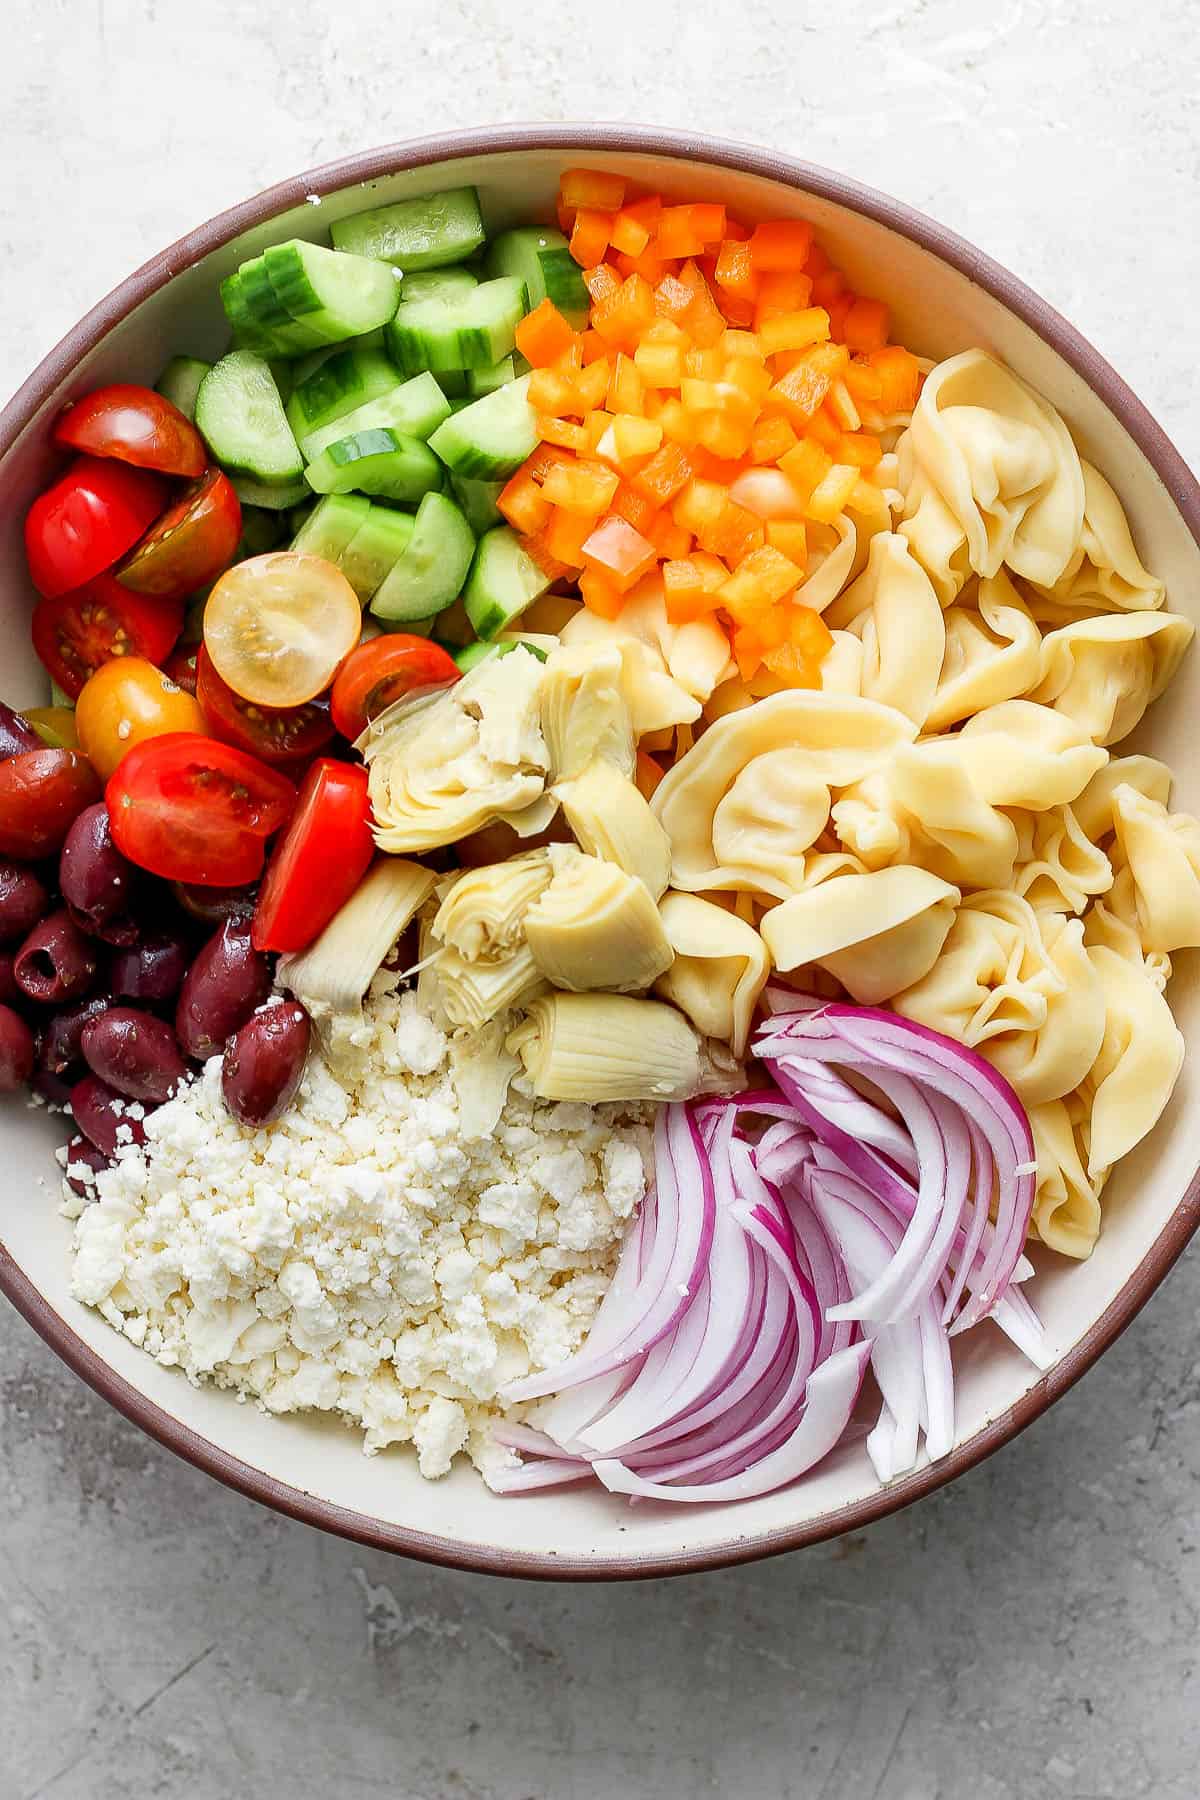 Feta cheese, sliced cherry tomatoes, sliced red onion, artichoke hearts, cheese tortellini, sliced cucumbers, olives and diced red bell pepper assembled in a bowl.